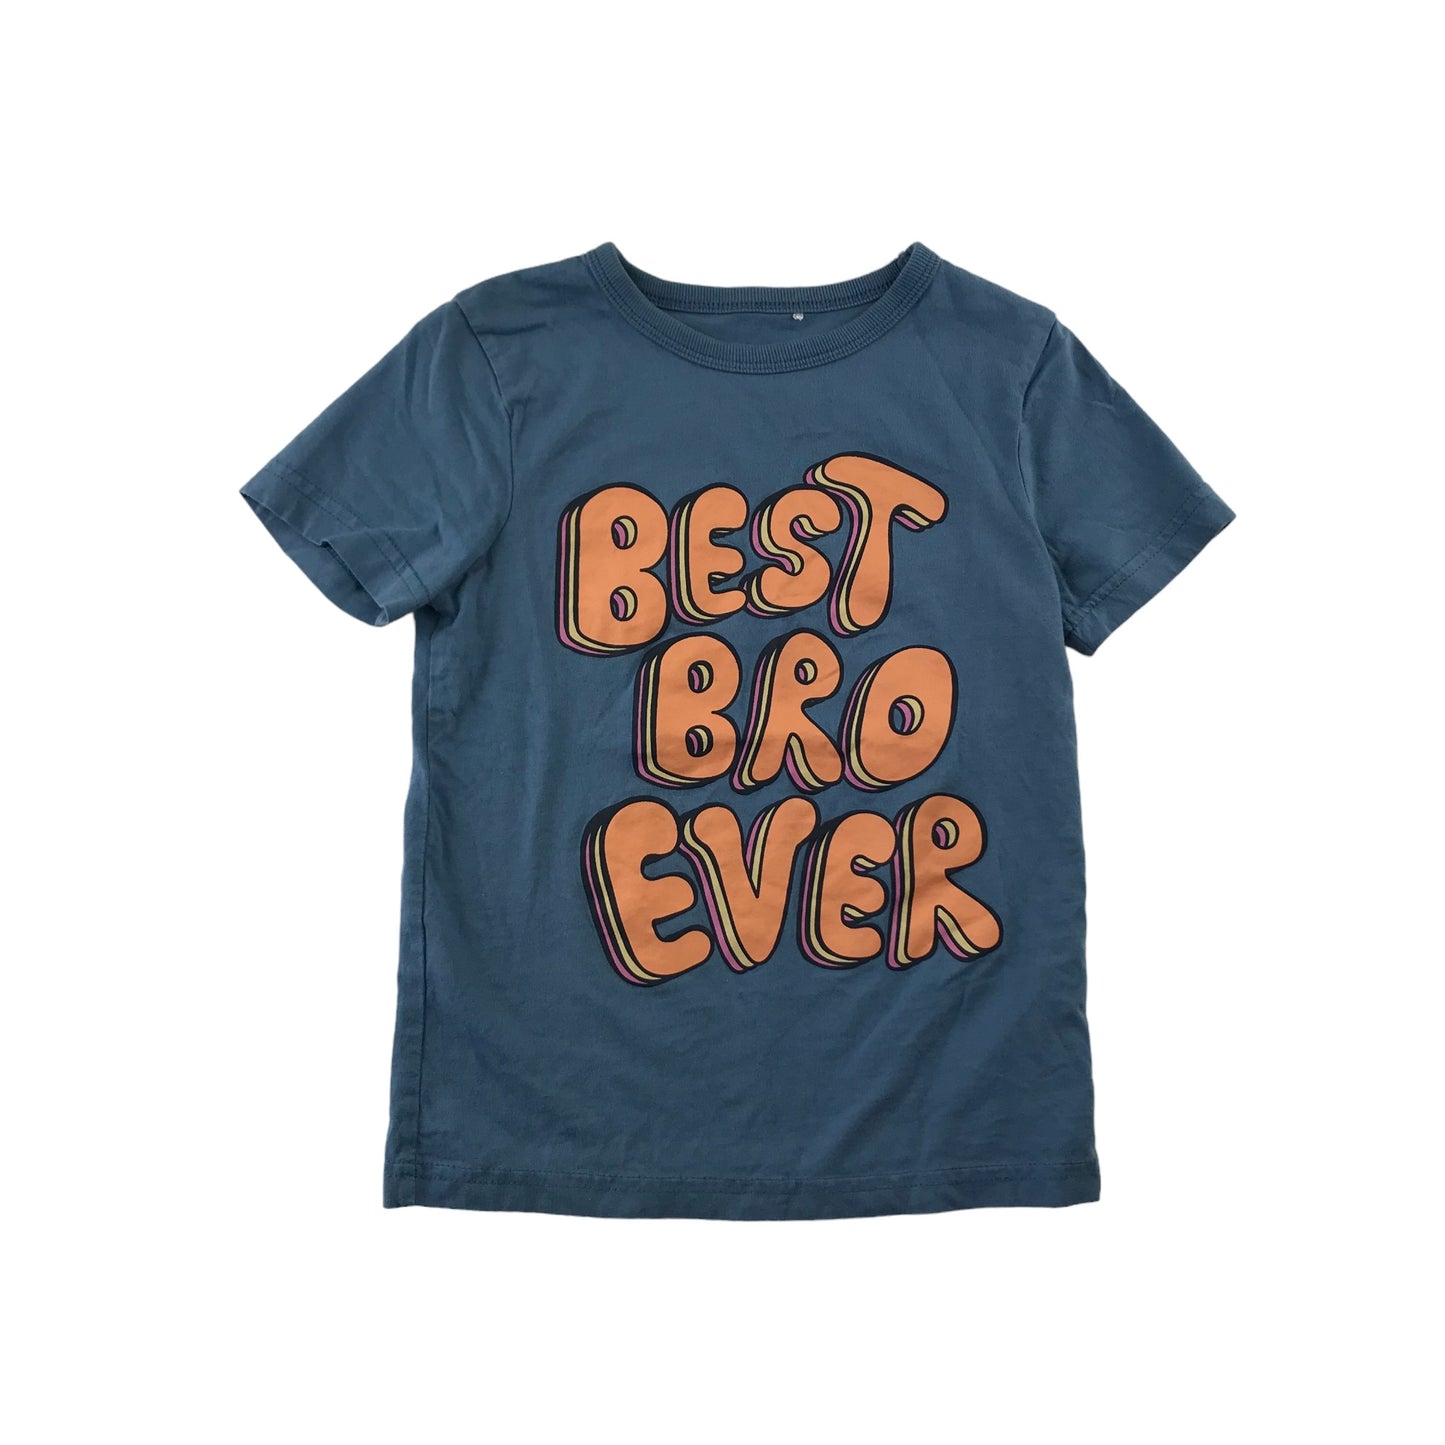 George T-shirt Age 5 Blue Best Bro Ever Graphic